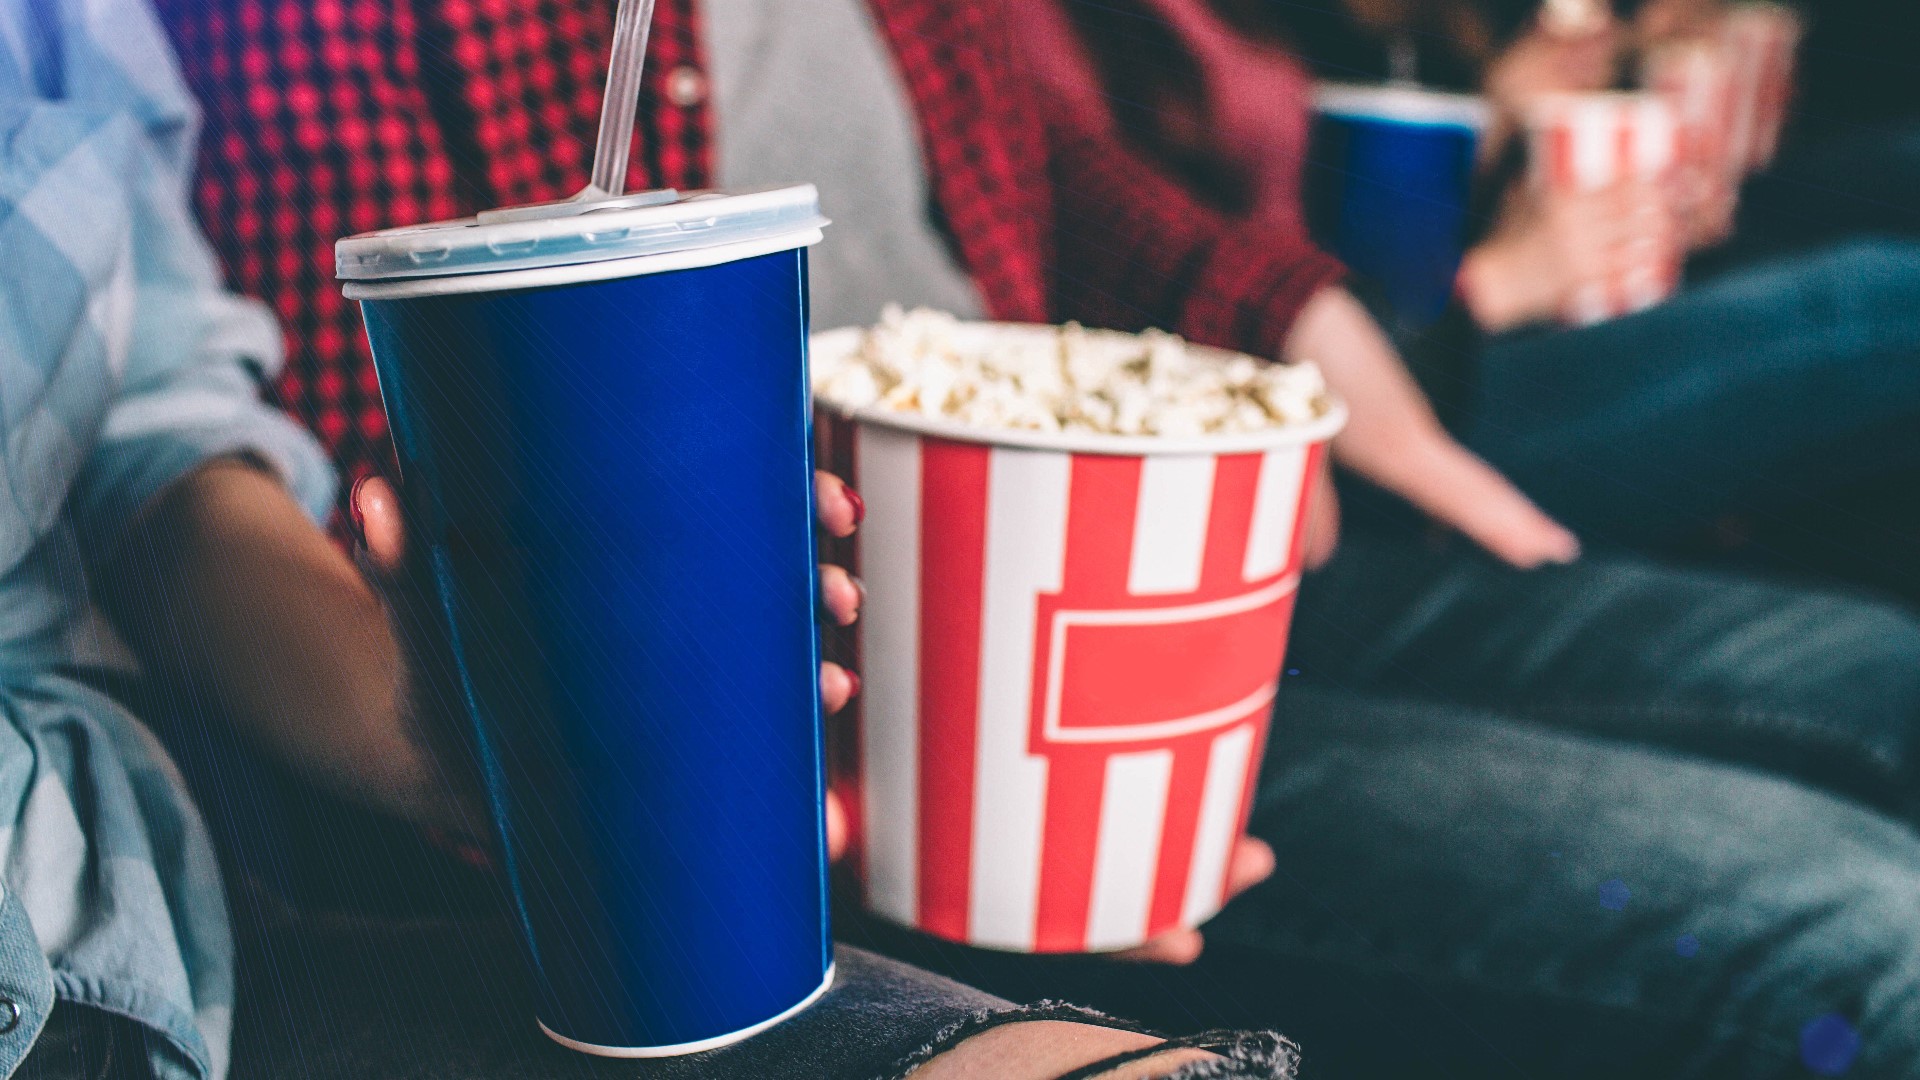 You will have to wear a mask, and won't be able to get a refill on your large popcorn thanks to COVID-19. Regal opens on August 21 and Cinemark opens on August 25.